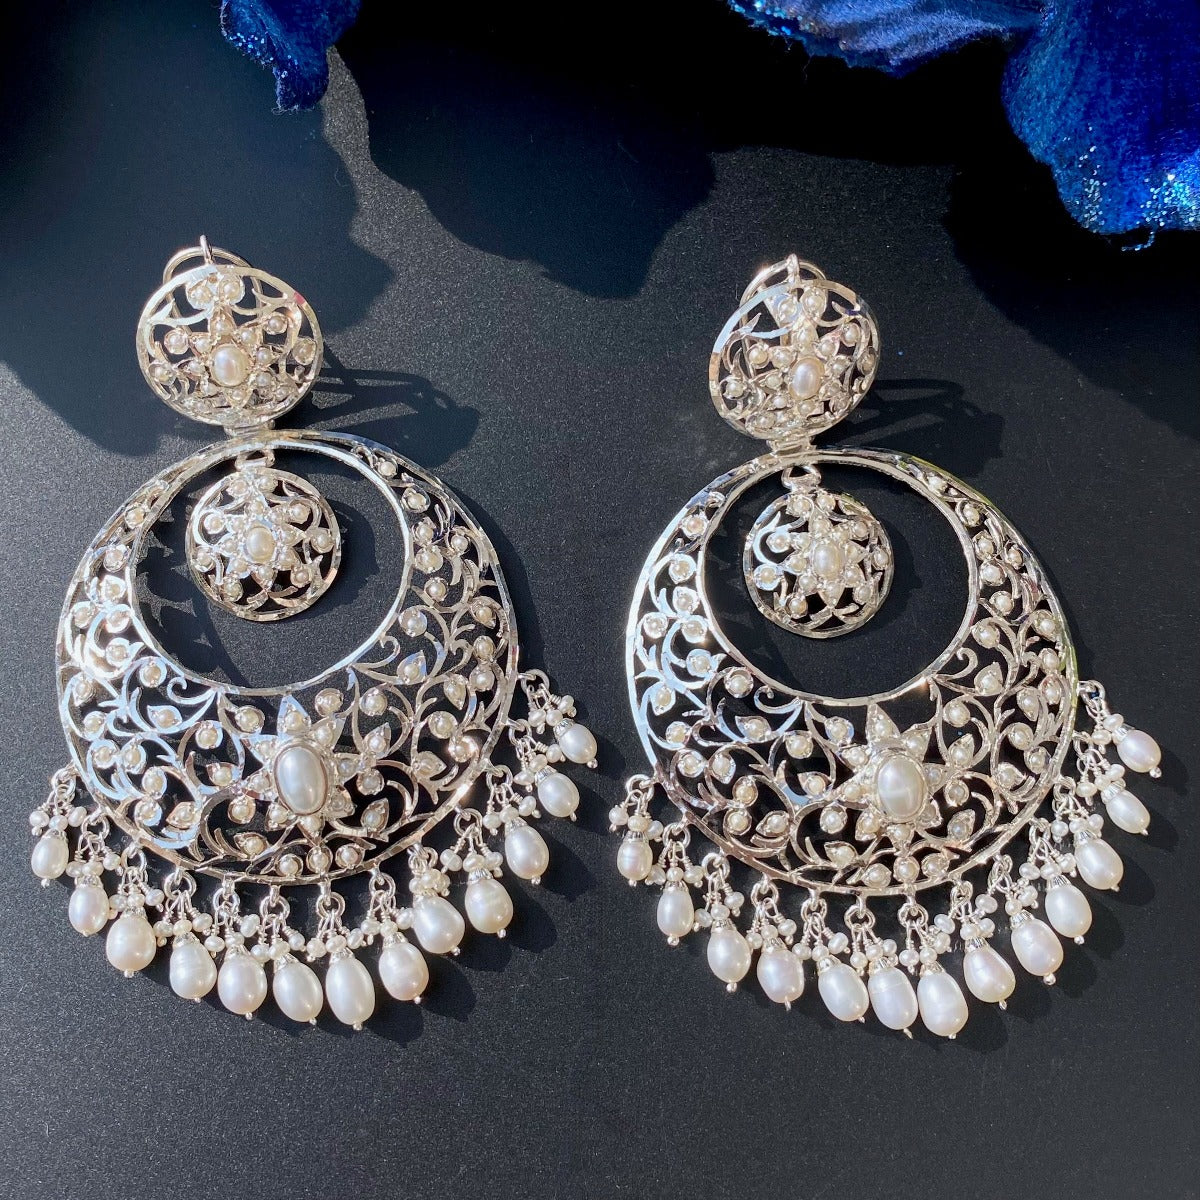 Indian Silver Earrings with Edwardian Victorian Flavor